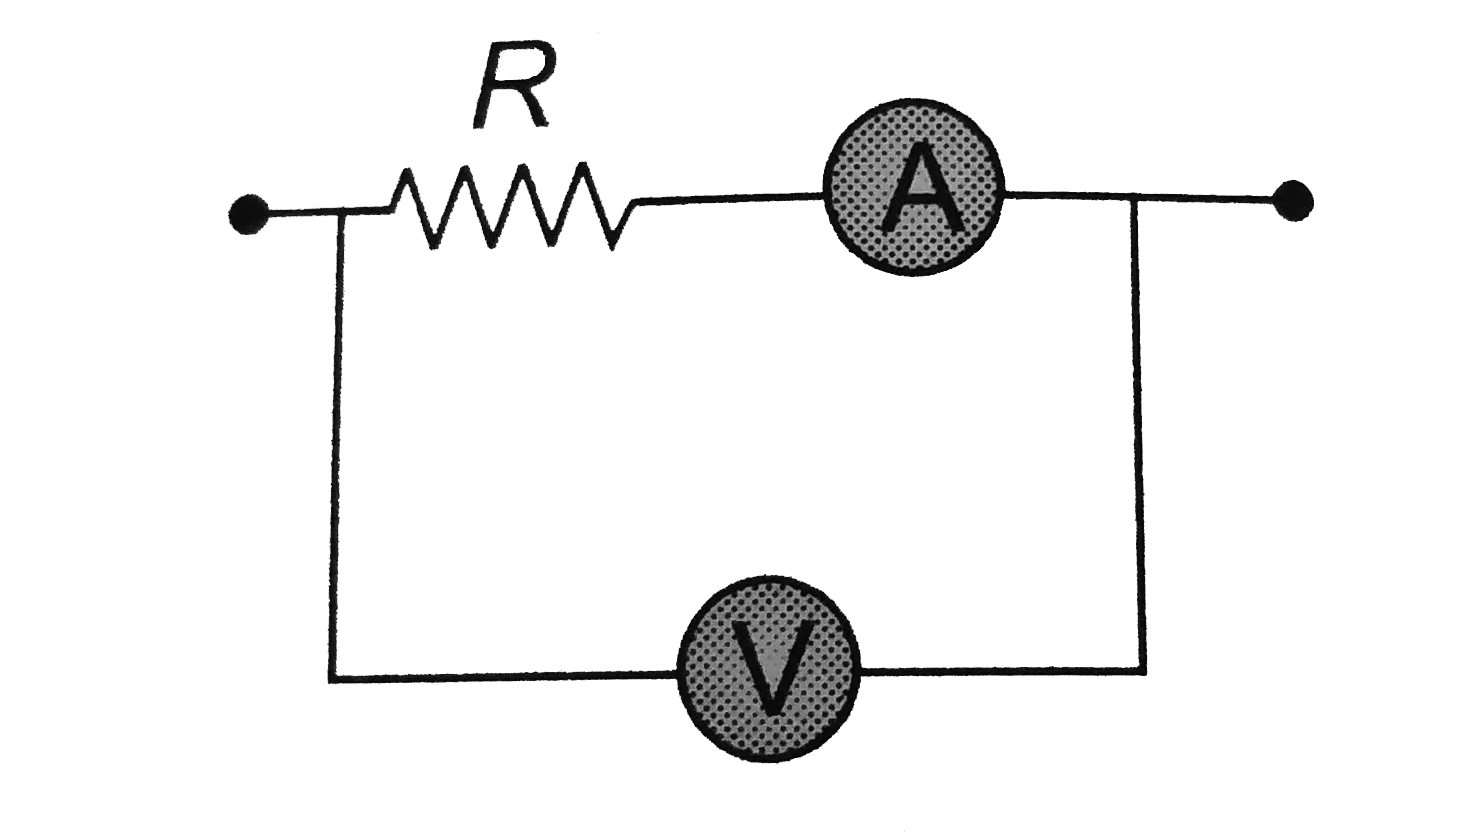 In the circuit shown the resistance of voltmeter is 10000 ohm and that of ammeter is 20 ohm. The ammeter reading is 0.10 amp and voltmeter reading is 12 volts. Then R is equal to